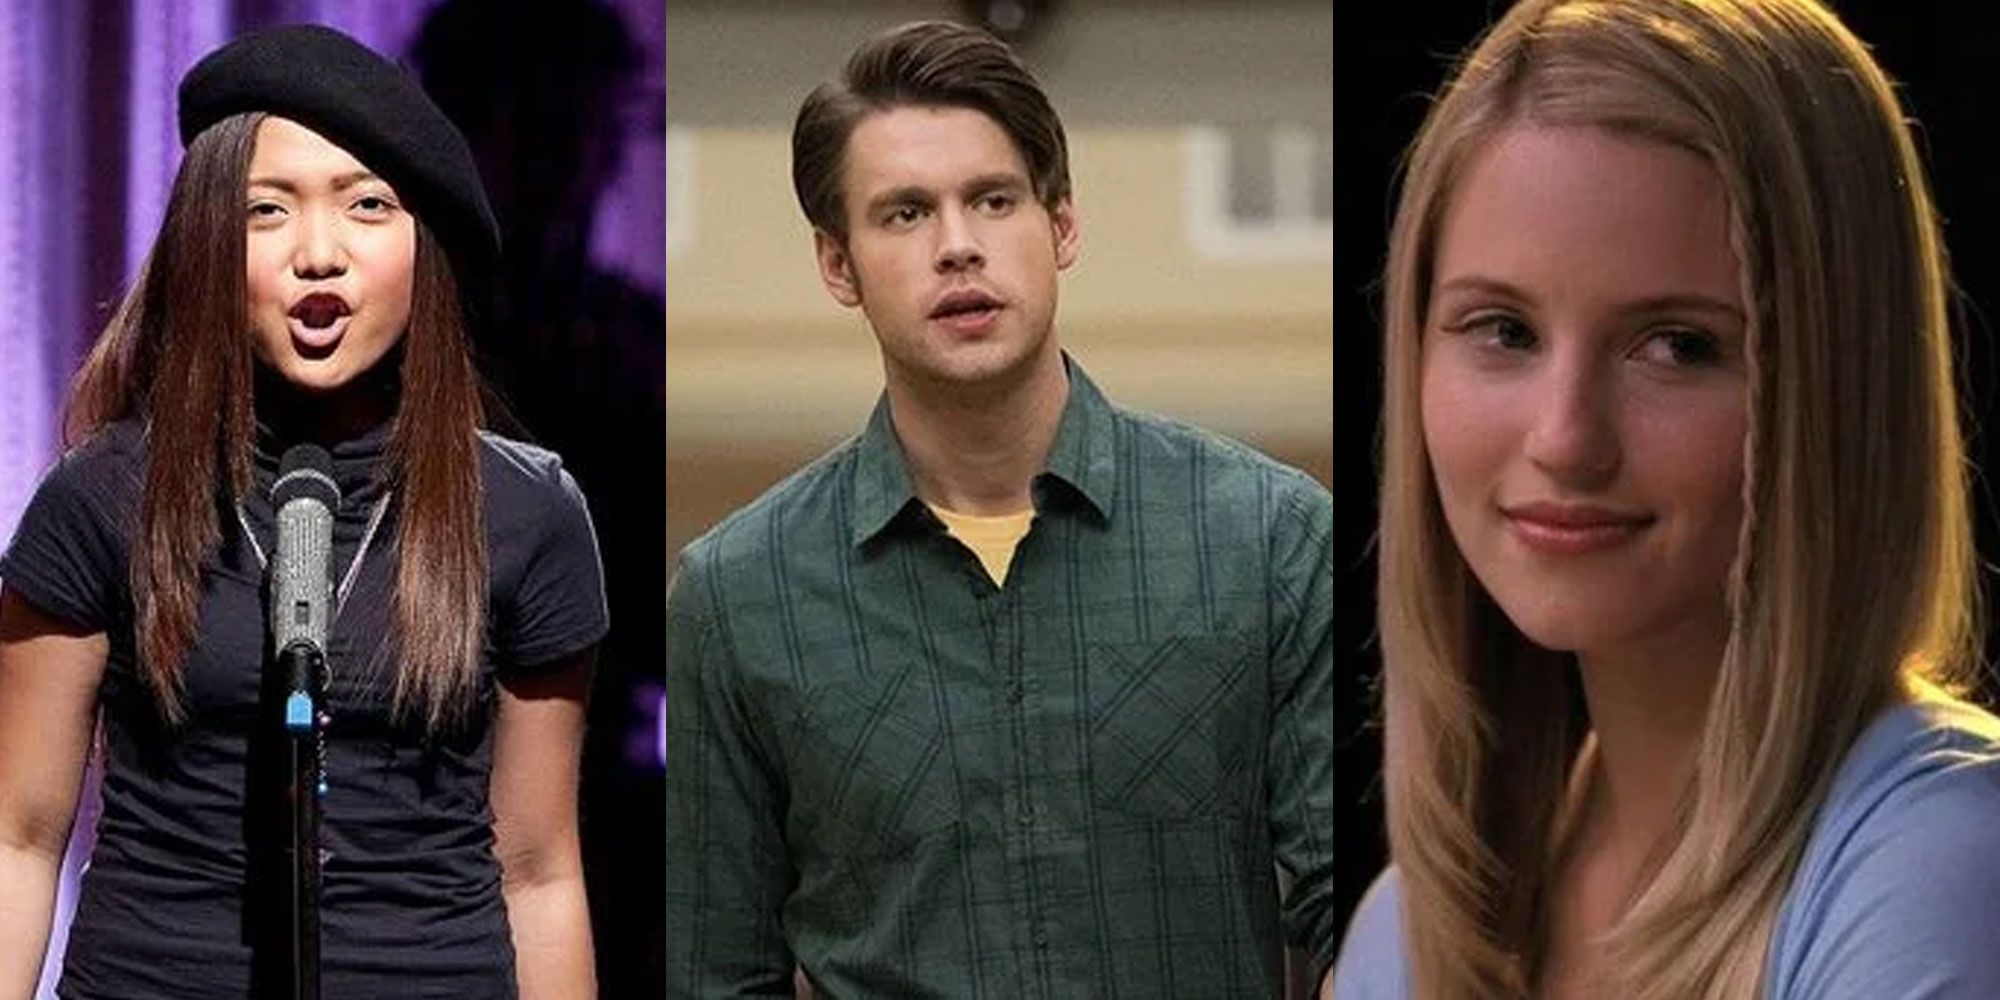 A split image features Glee characters Sunshine, Sam, and Quinn